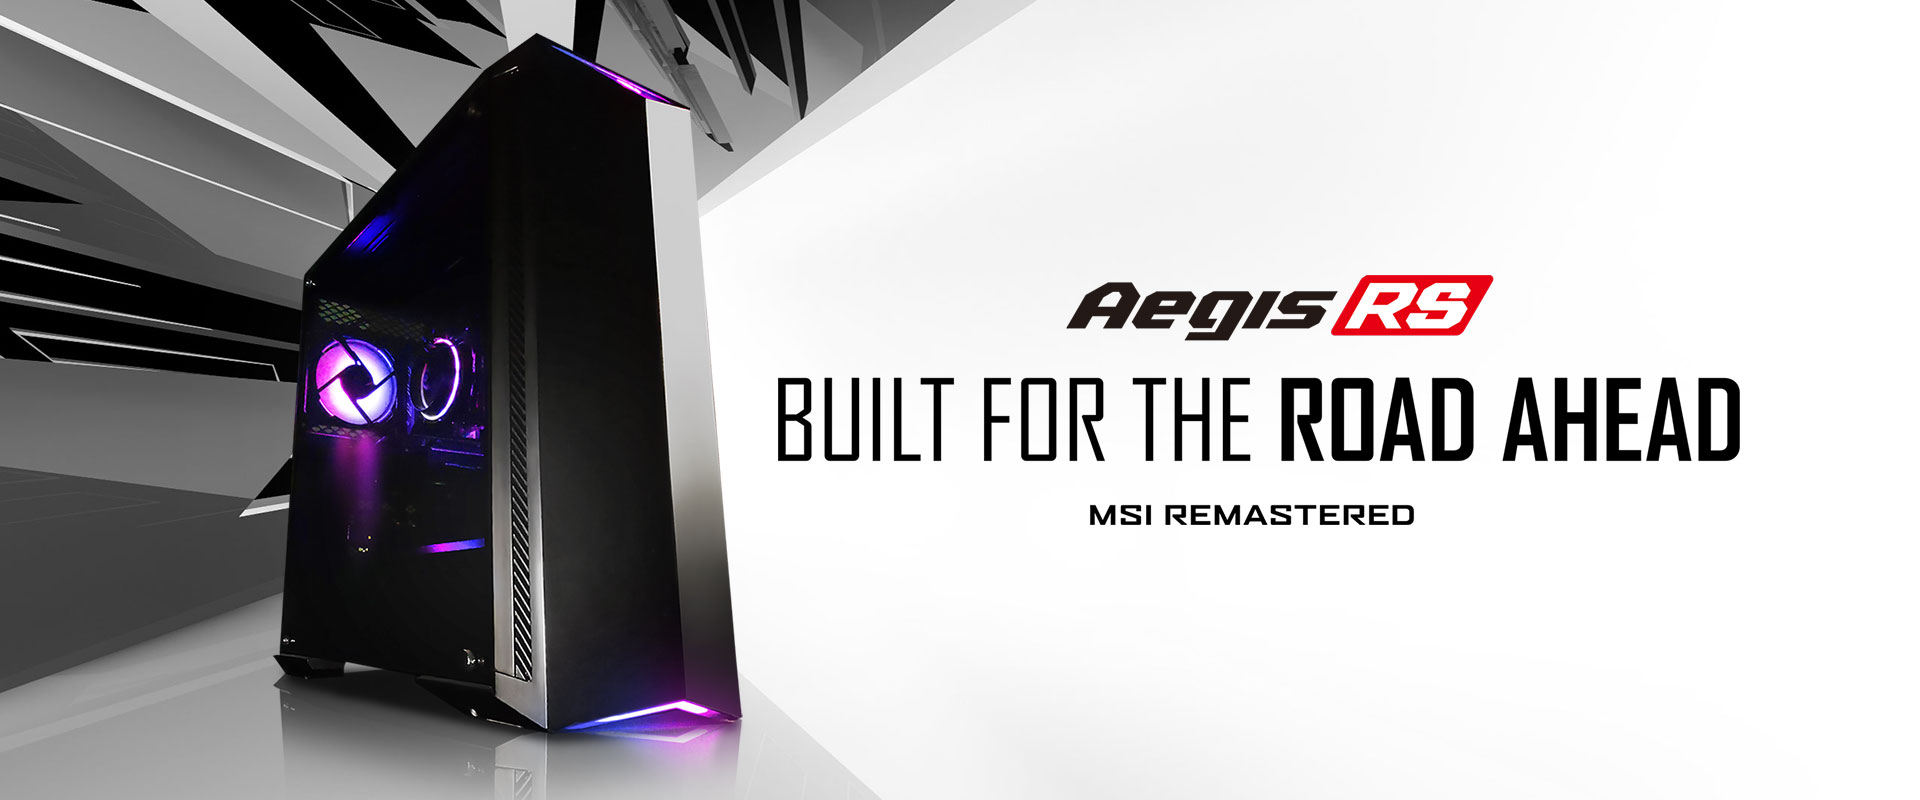 Hero Image: Aegis RS product image. The text right to it says: Aegis RS. BUILT FOR THE ROAD AHEAD. MSI REMASTERED